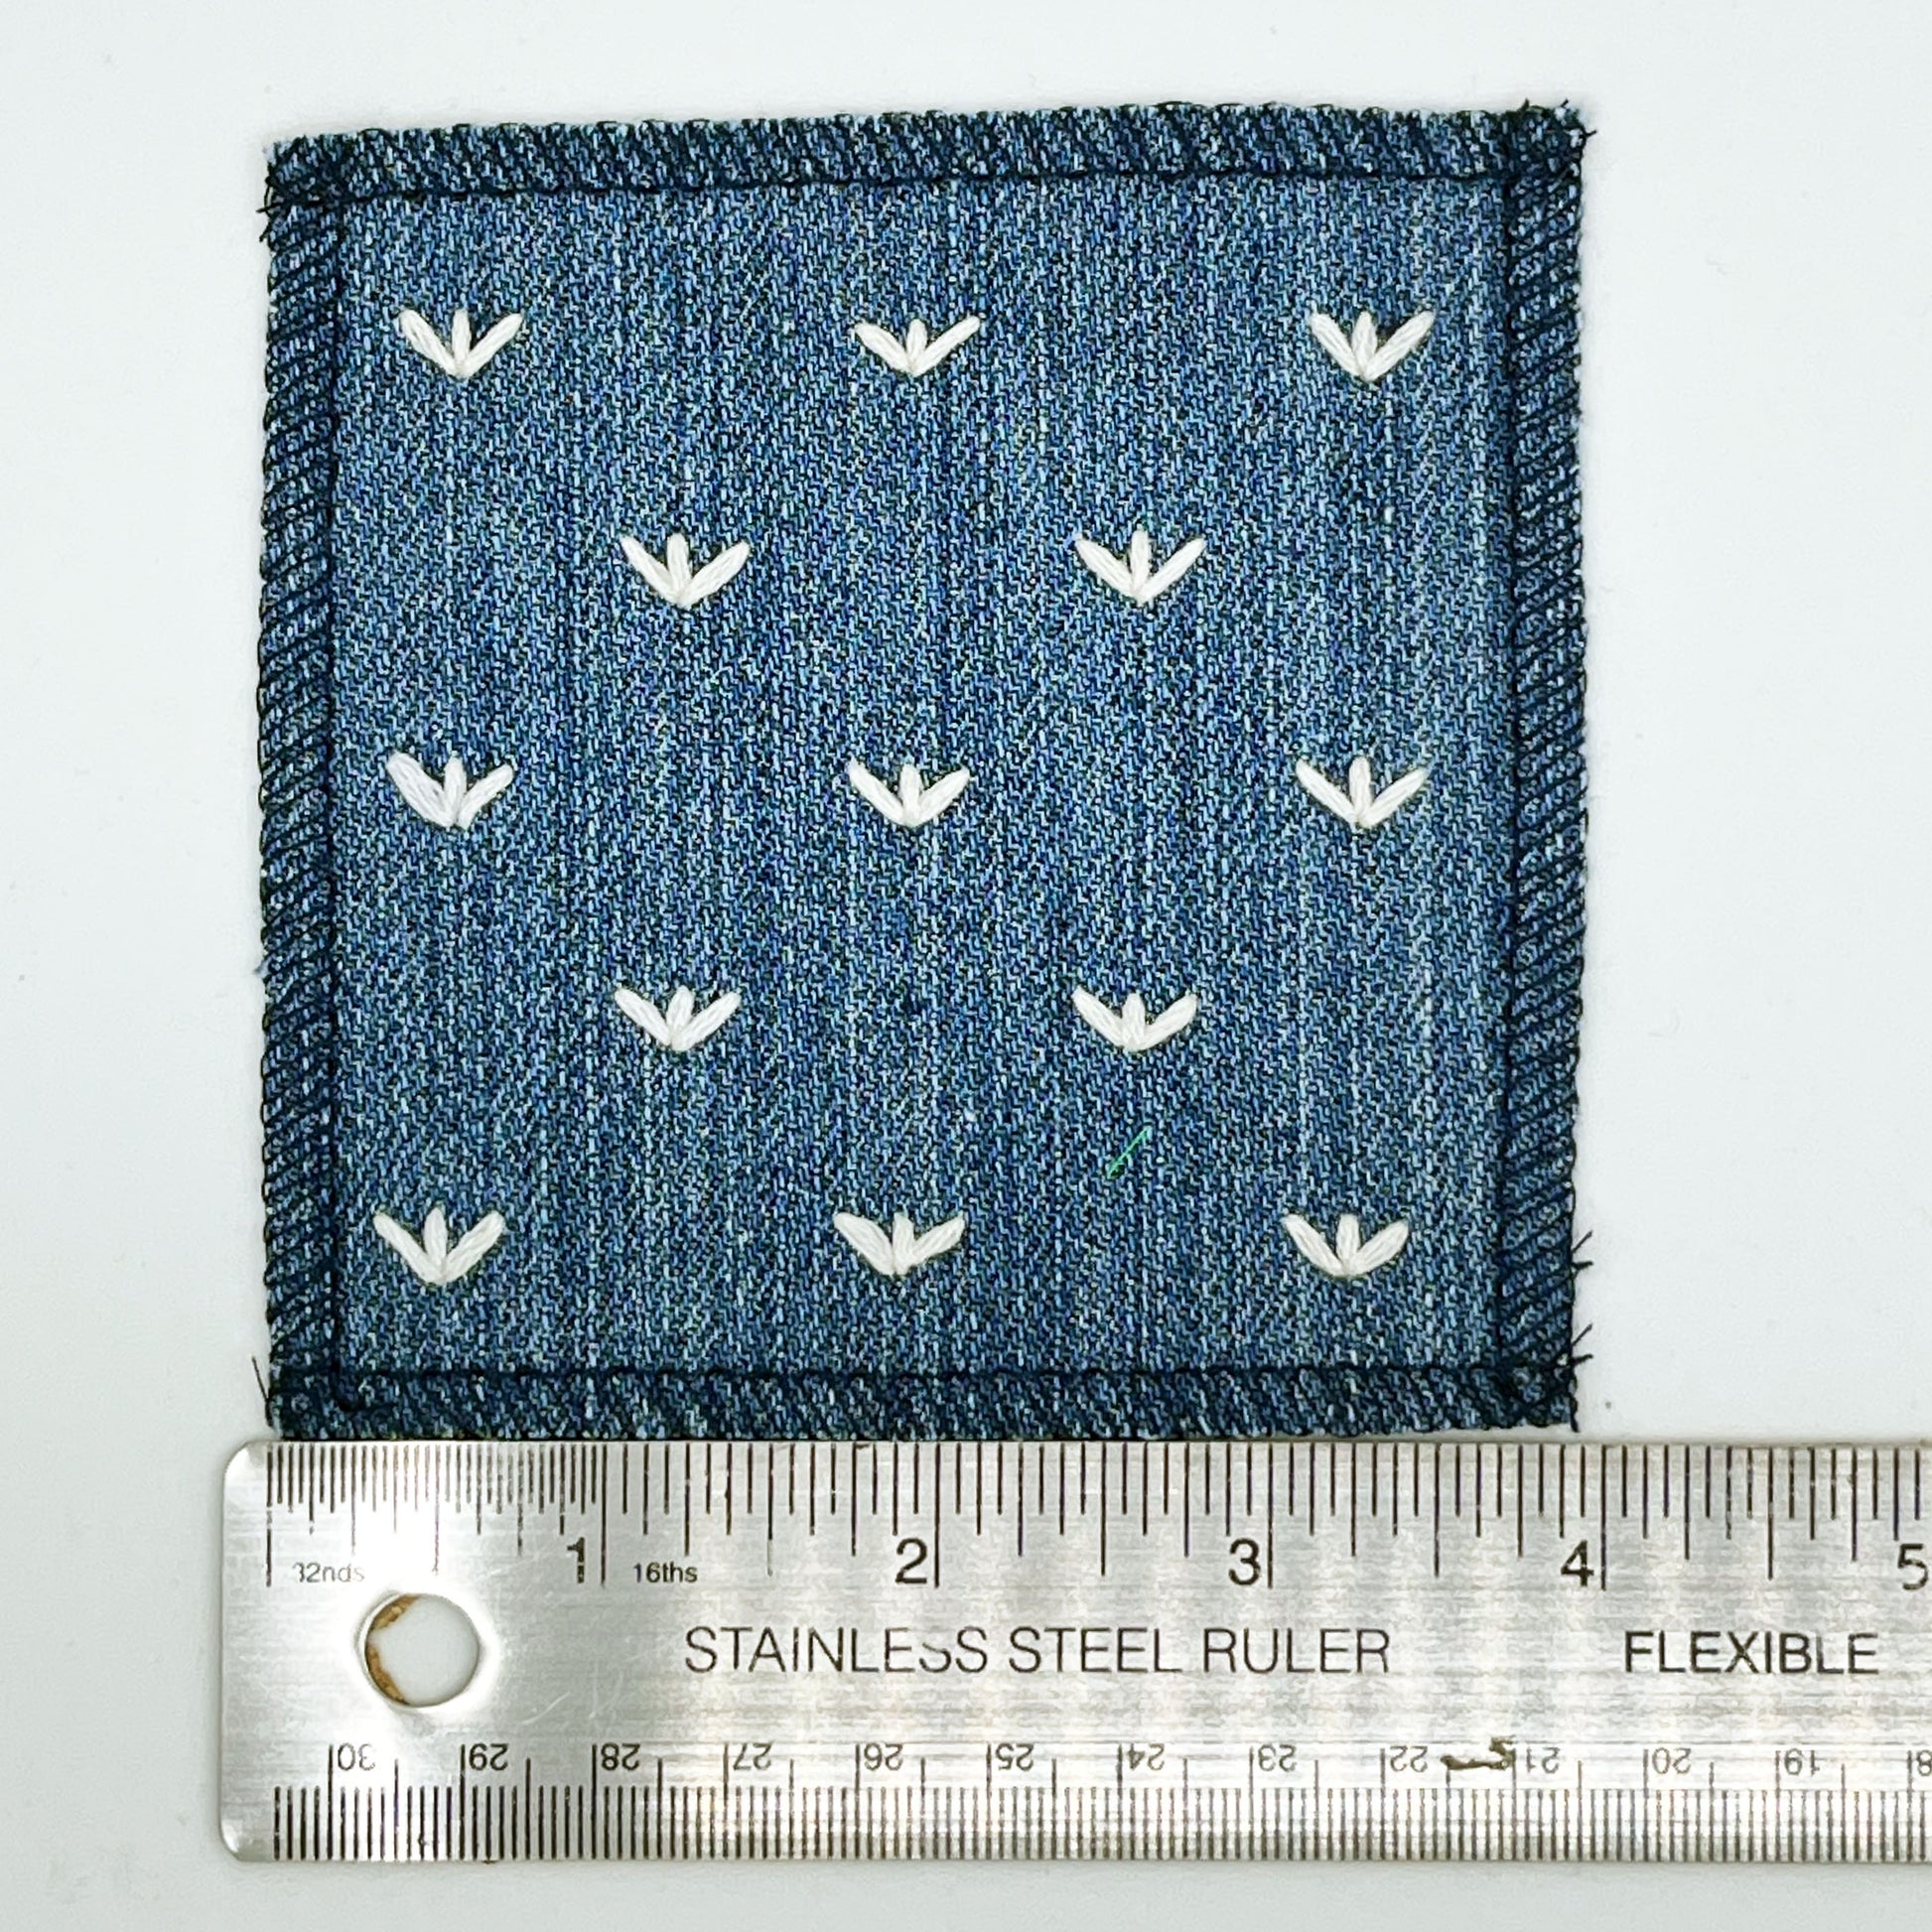 a square denim patch, with ivory stitches that look like birds feet or sprouts spread out in a diamond pattern, with overlocked edges, placed next to a metal ruler to show a width of four inches